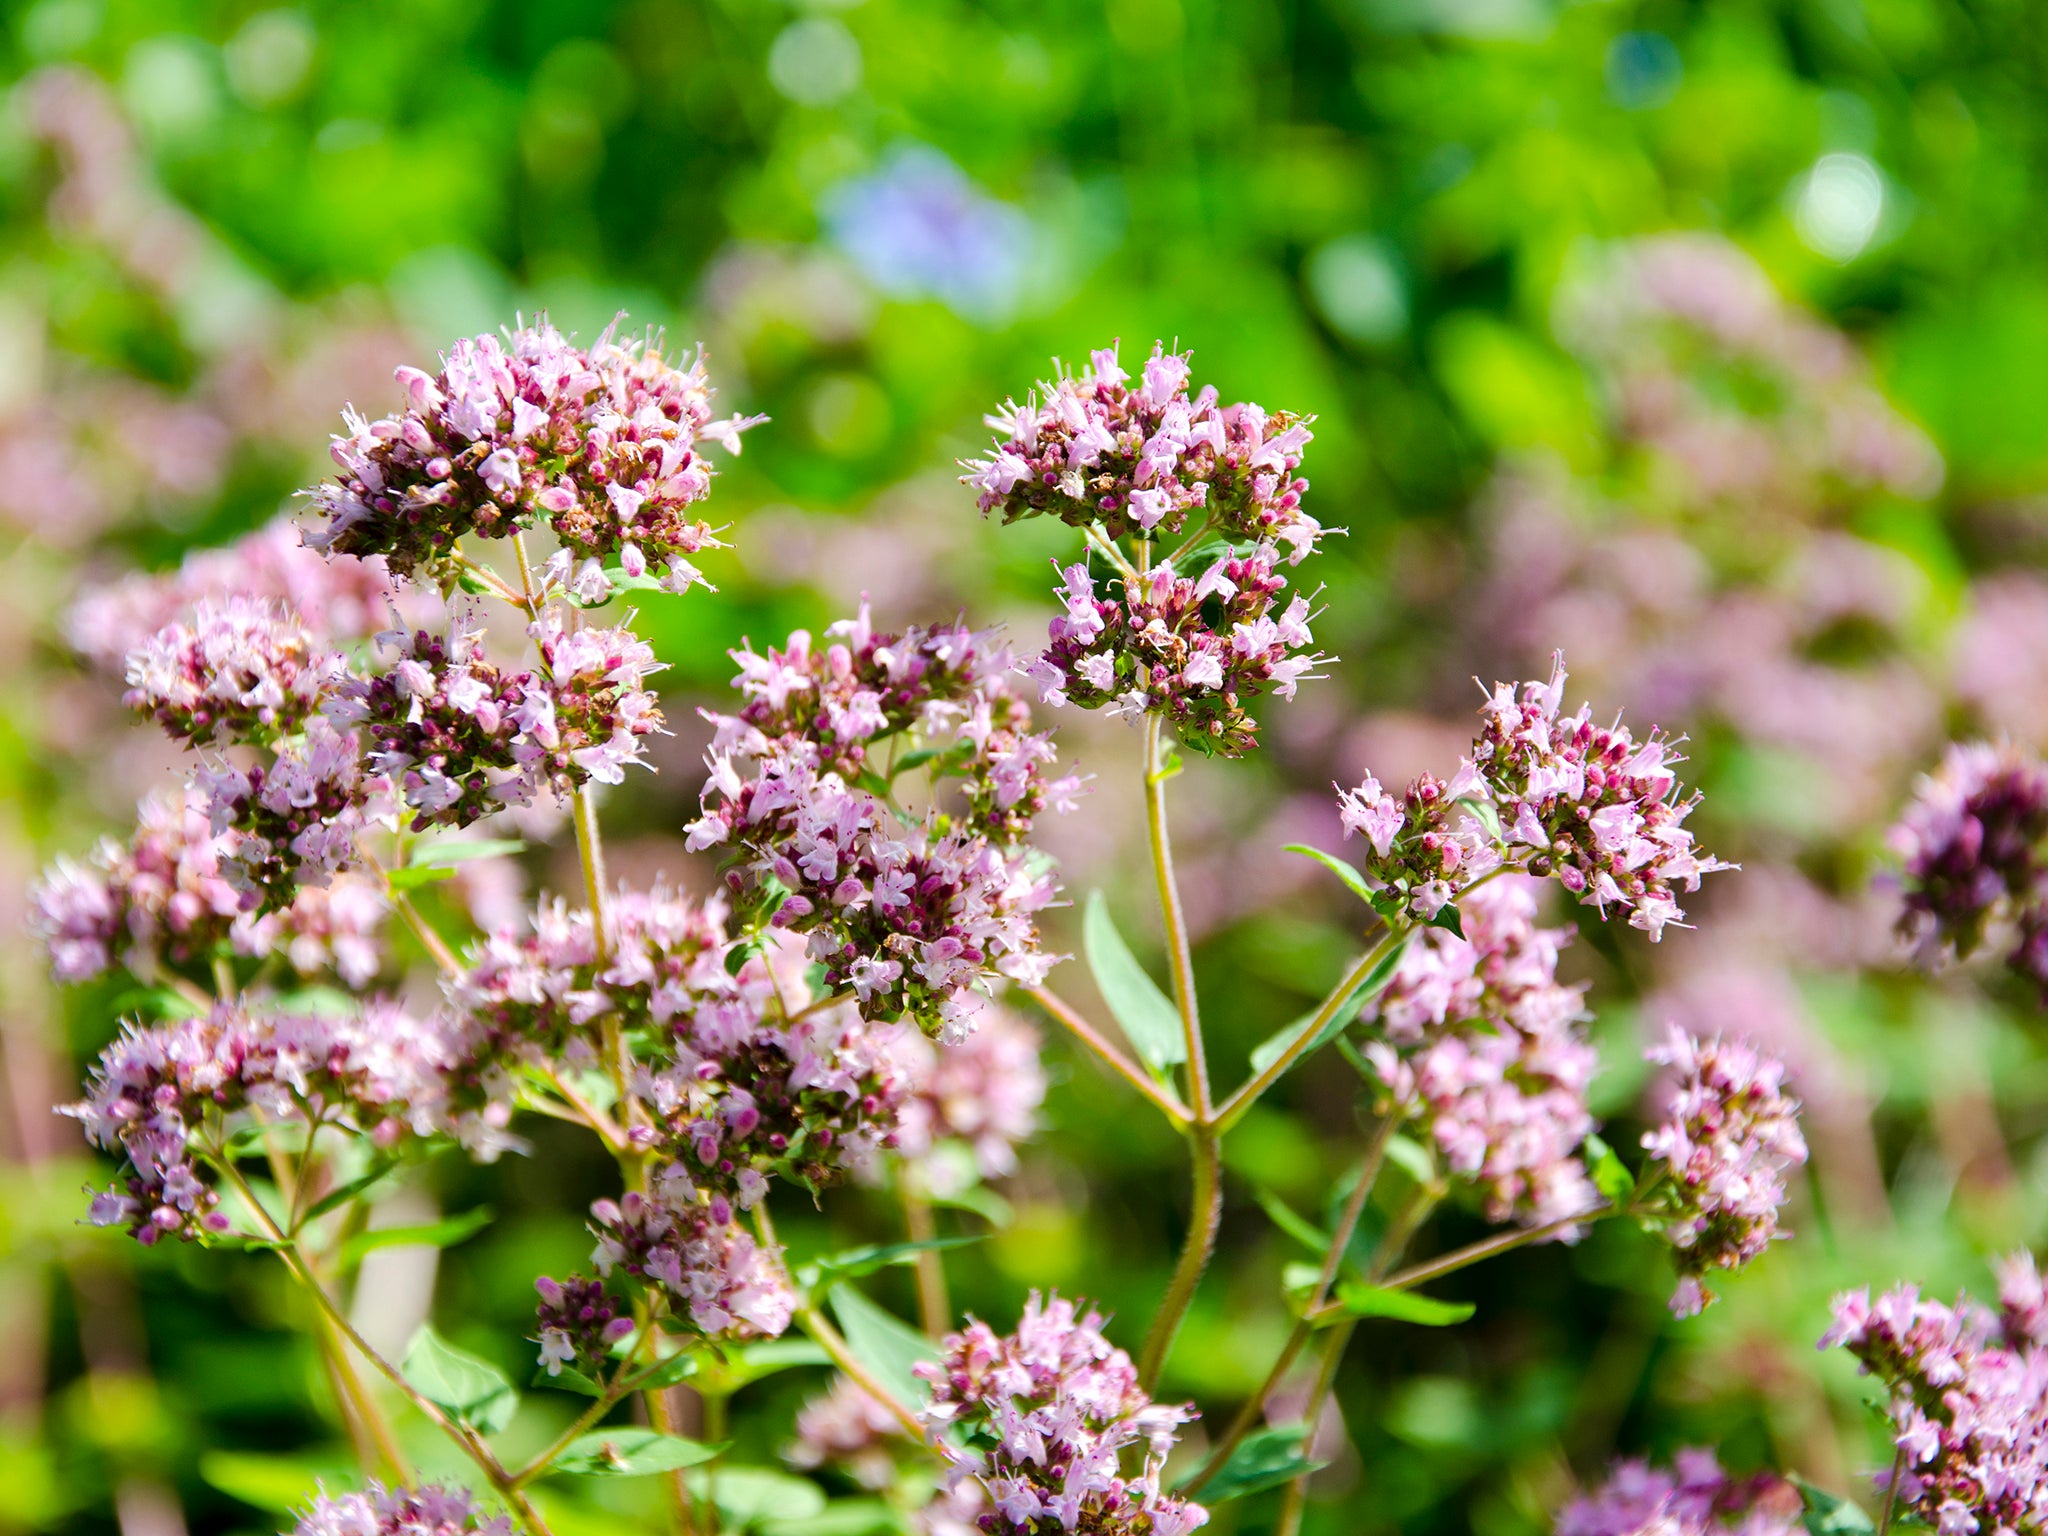 Marjoram smells like pizza and attracts butterflies (Getty)